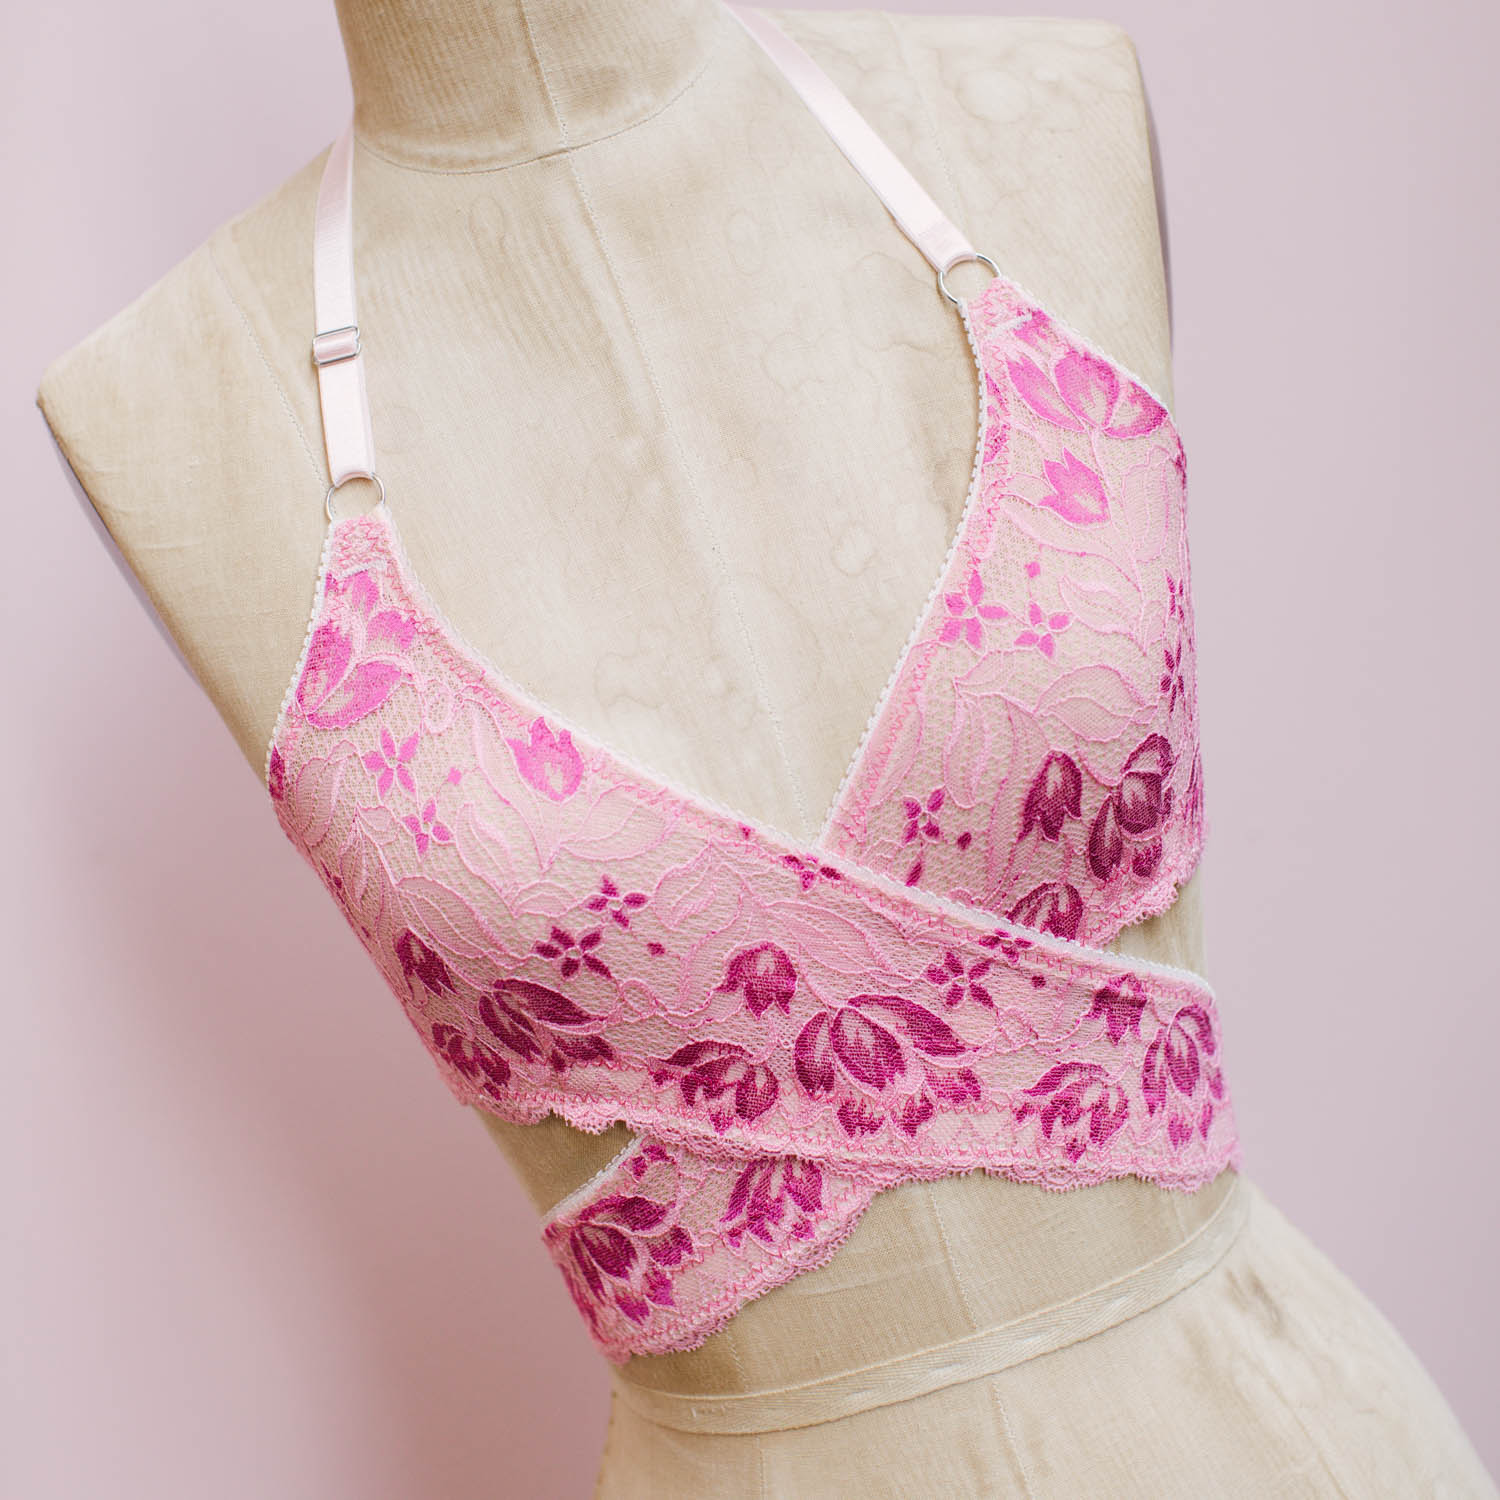 DIY LACE HALTER BRALETTE WITH FREE SEWING PATTERNS